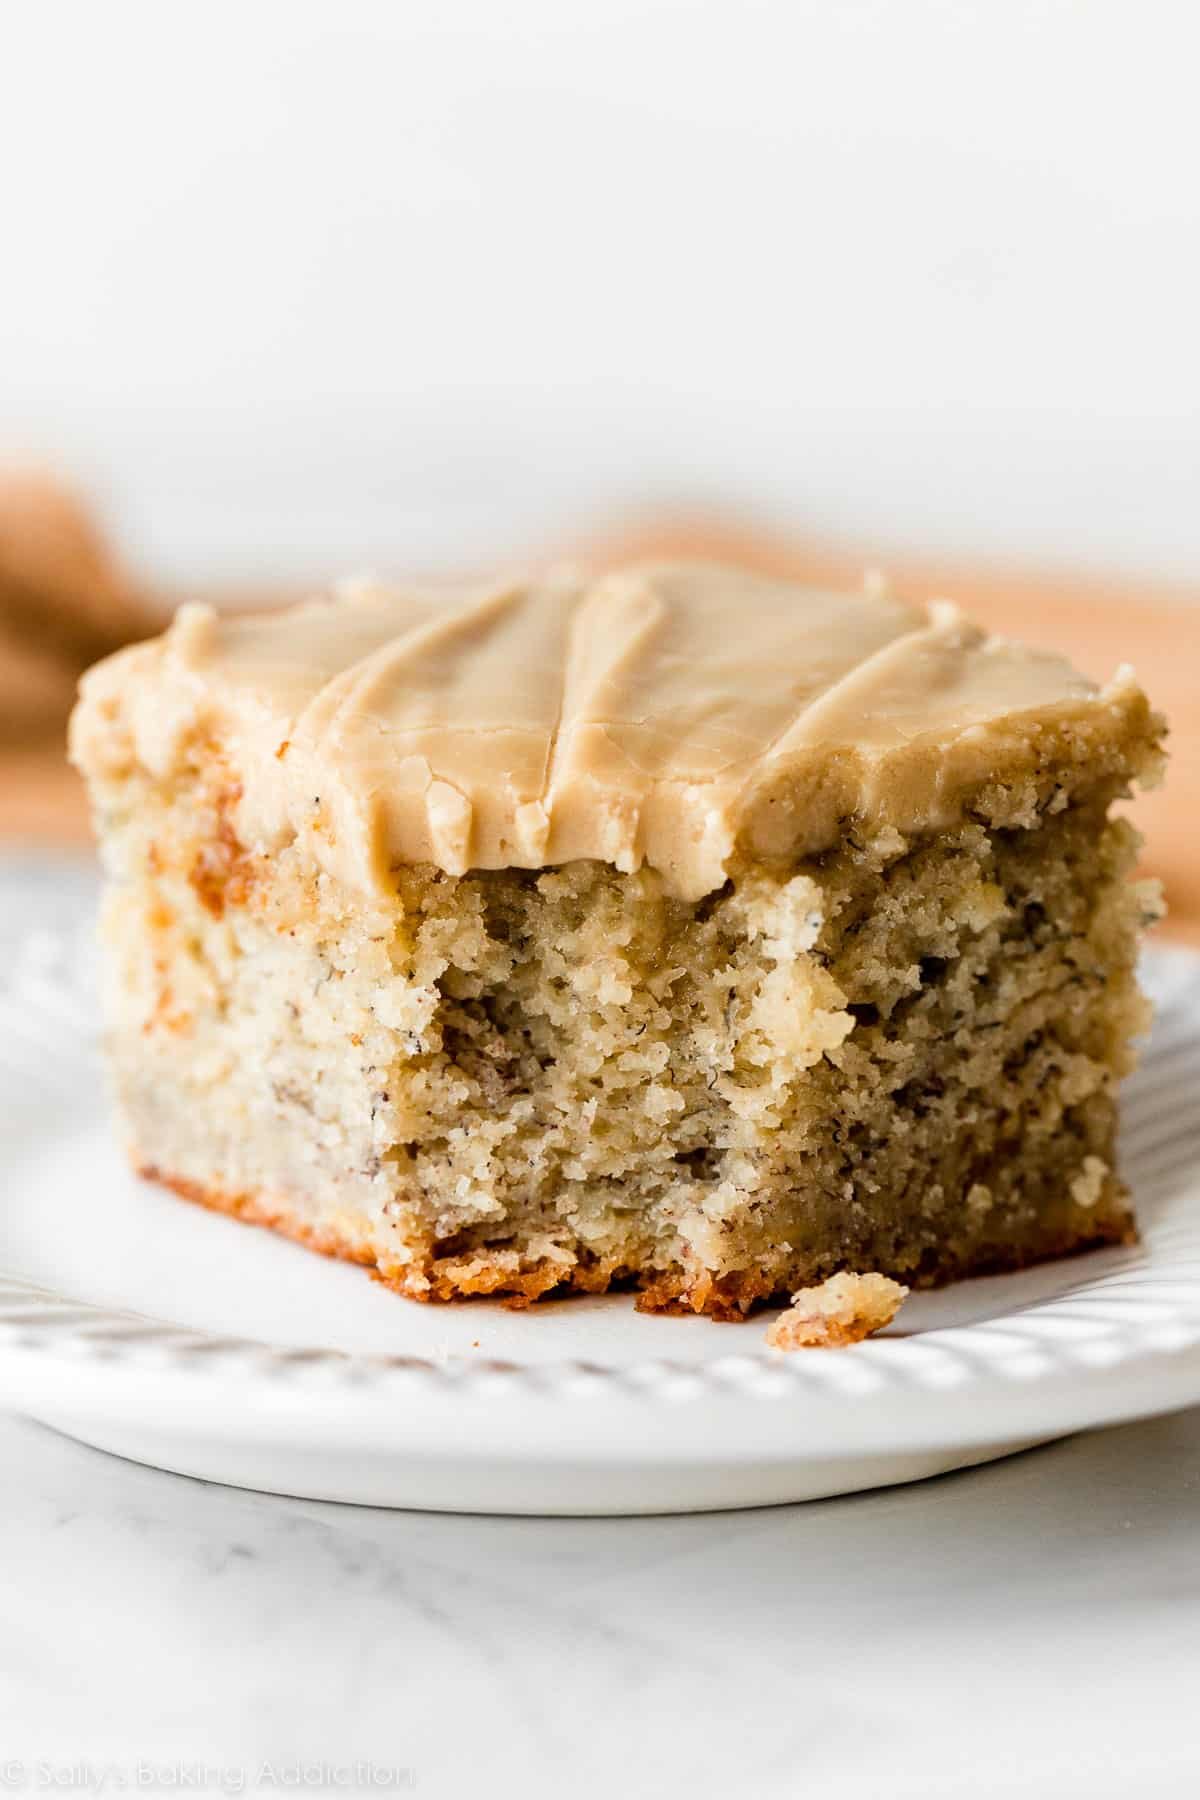 banana cake slice with salted caramel frosting on top.